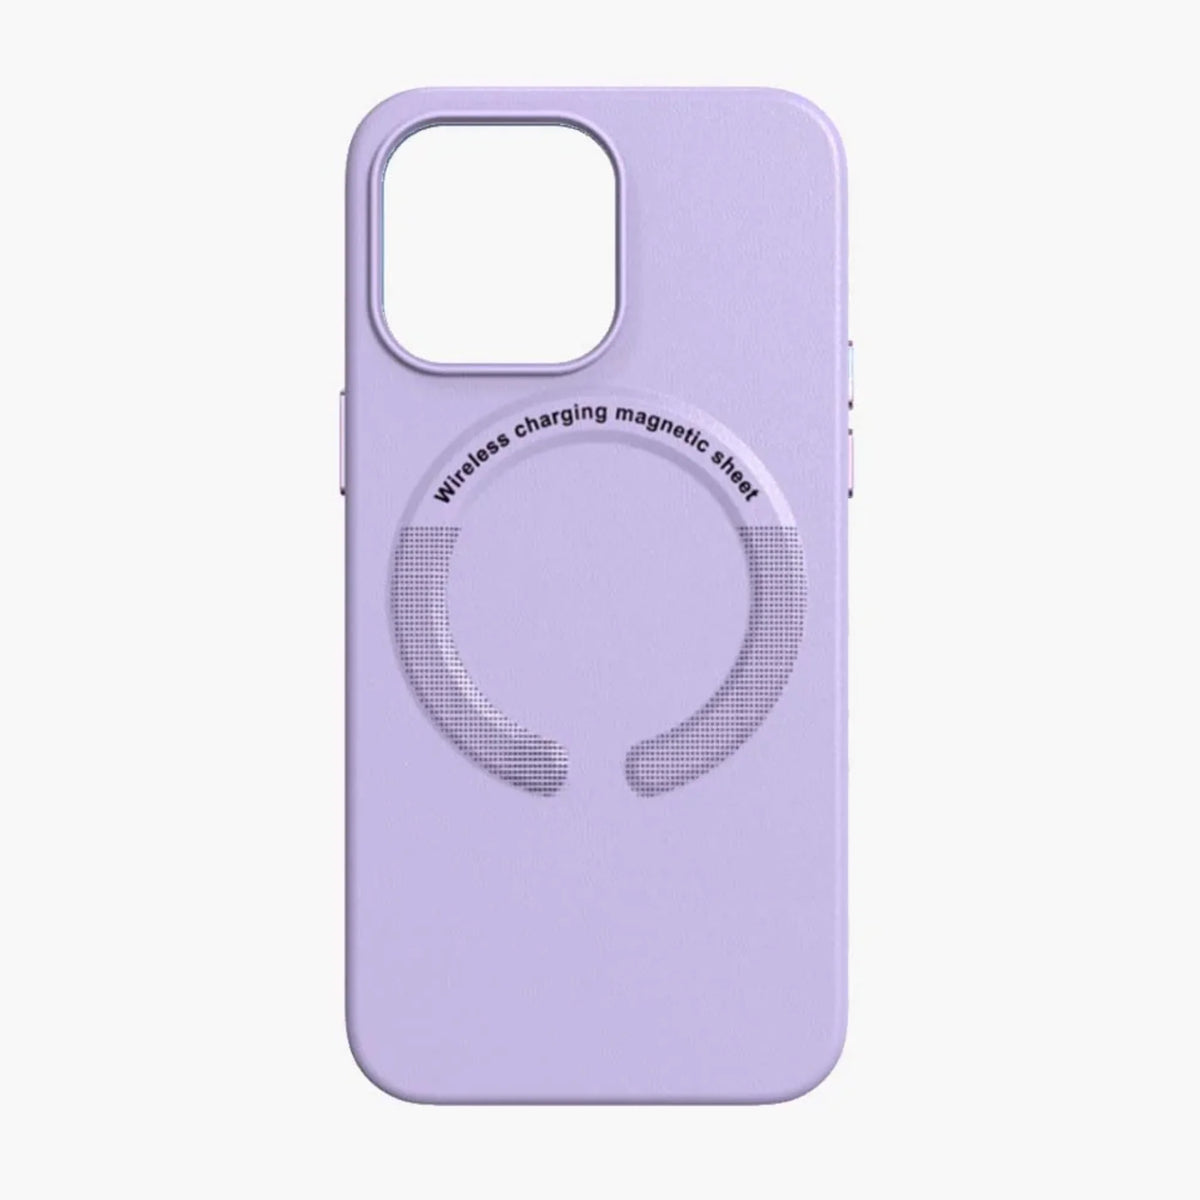 iPhone Leather Magsafe Case - Lavender